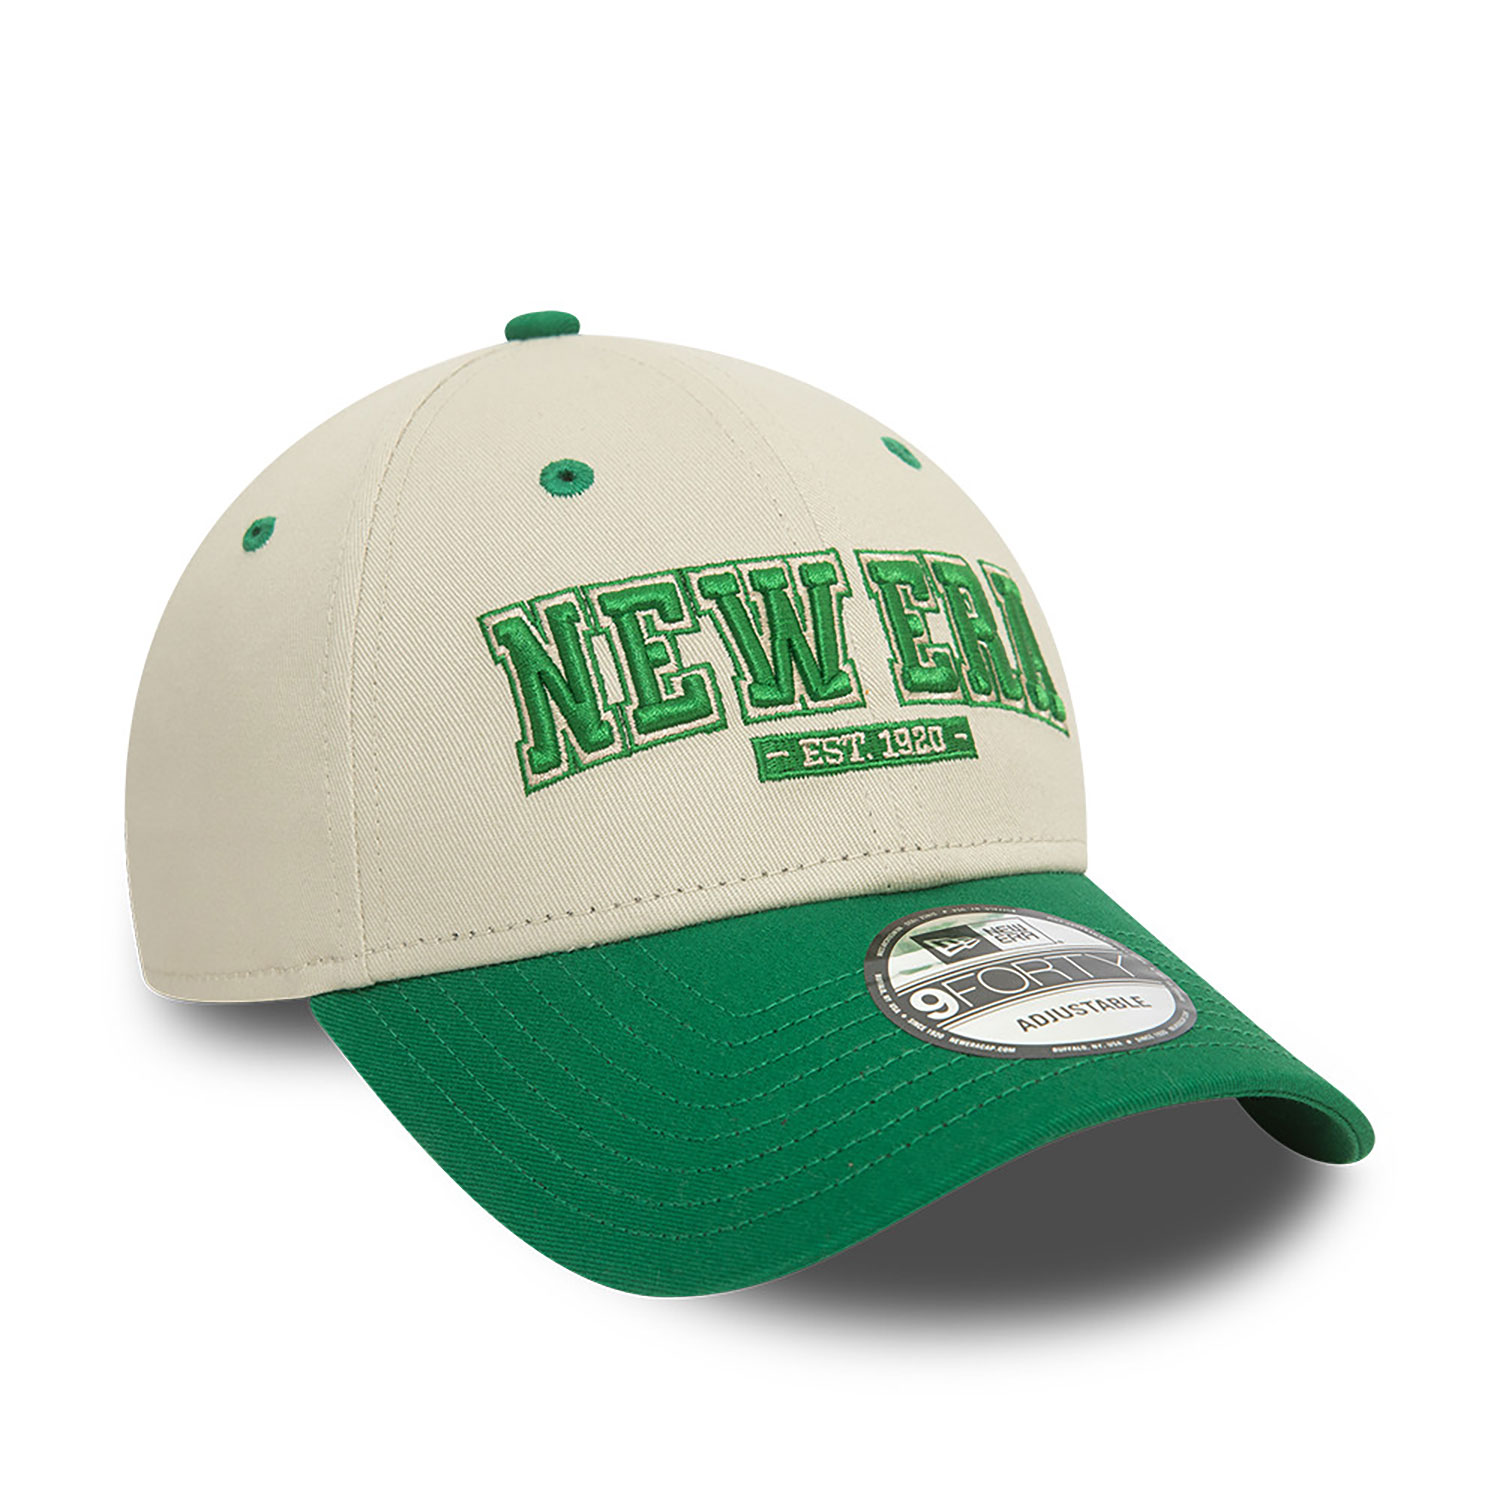 New Era Script Contrast Stone and Green 9FORTY Adjustable Cap